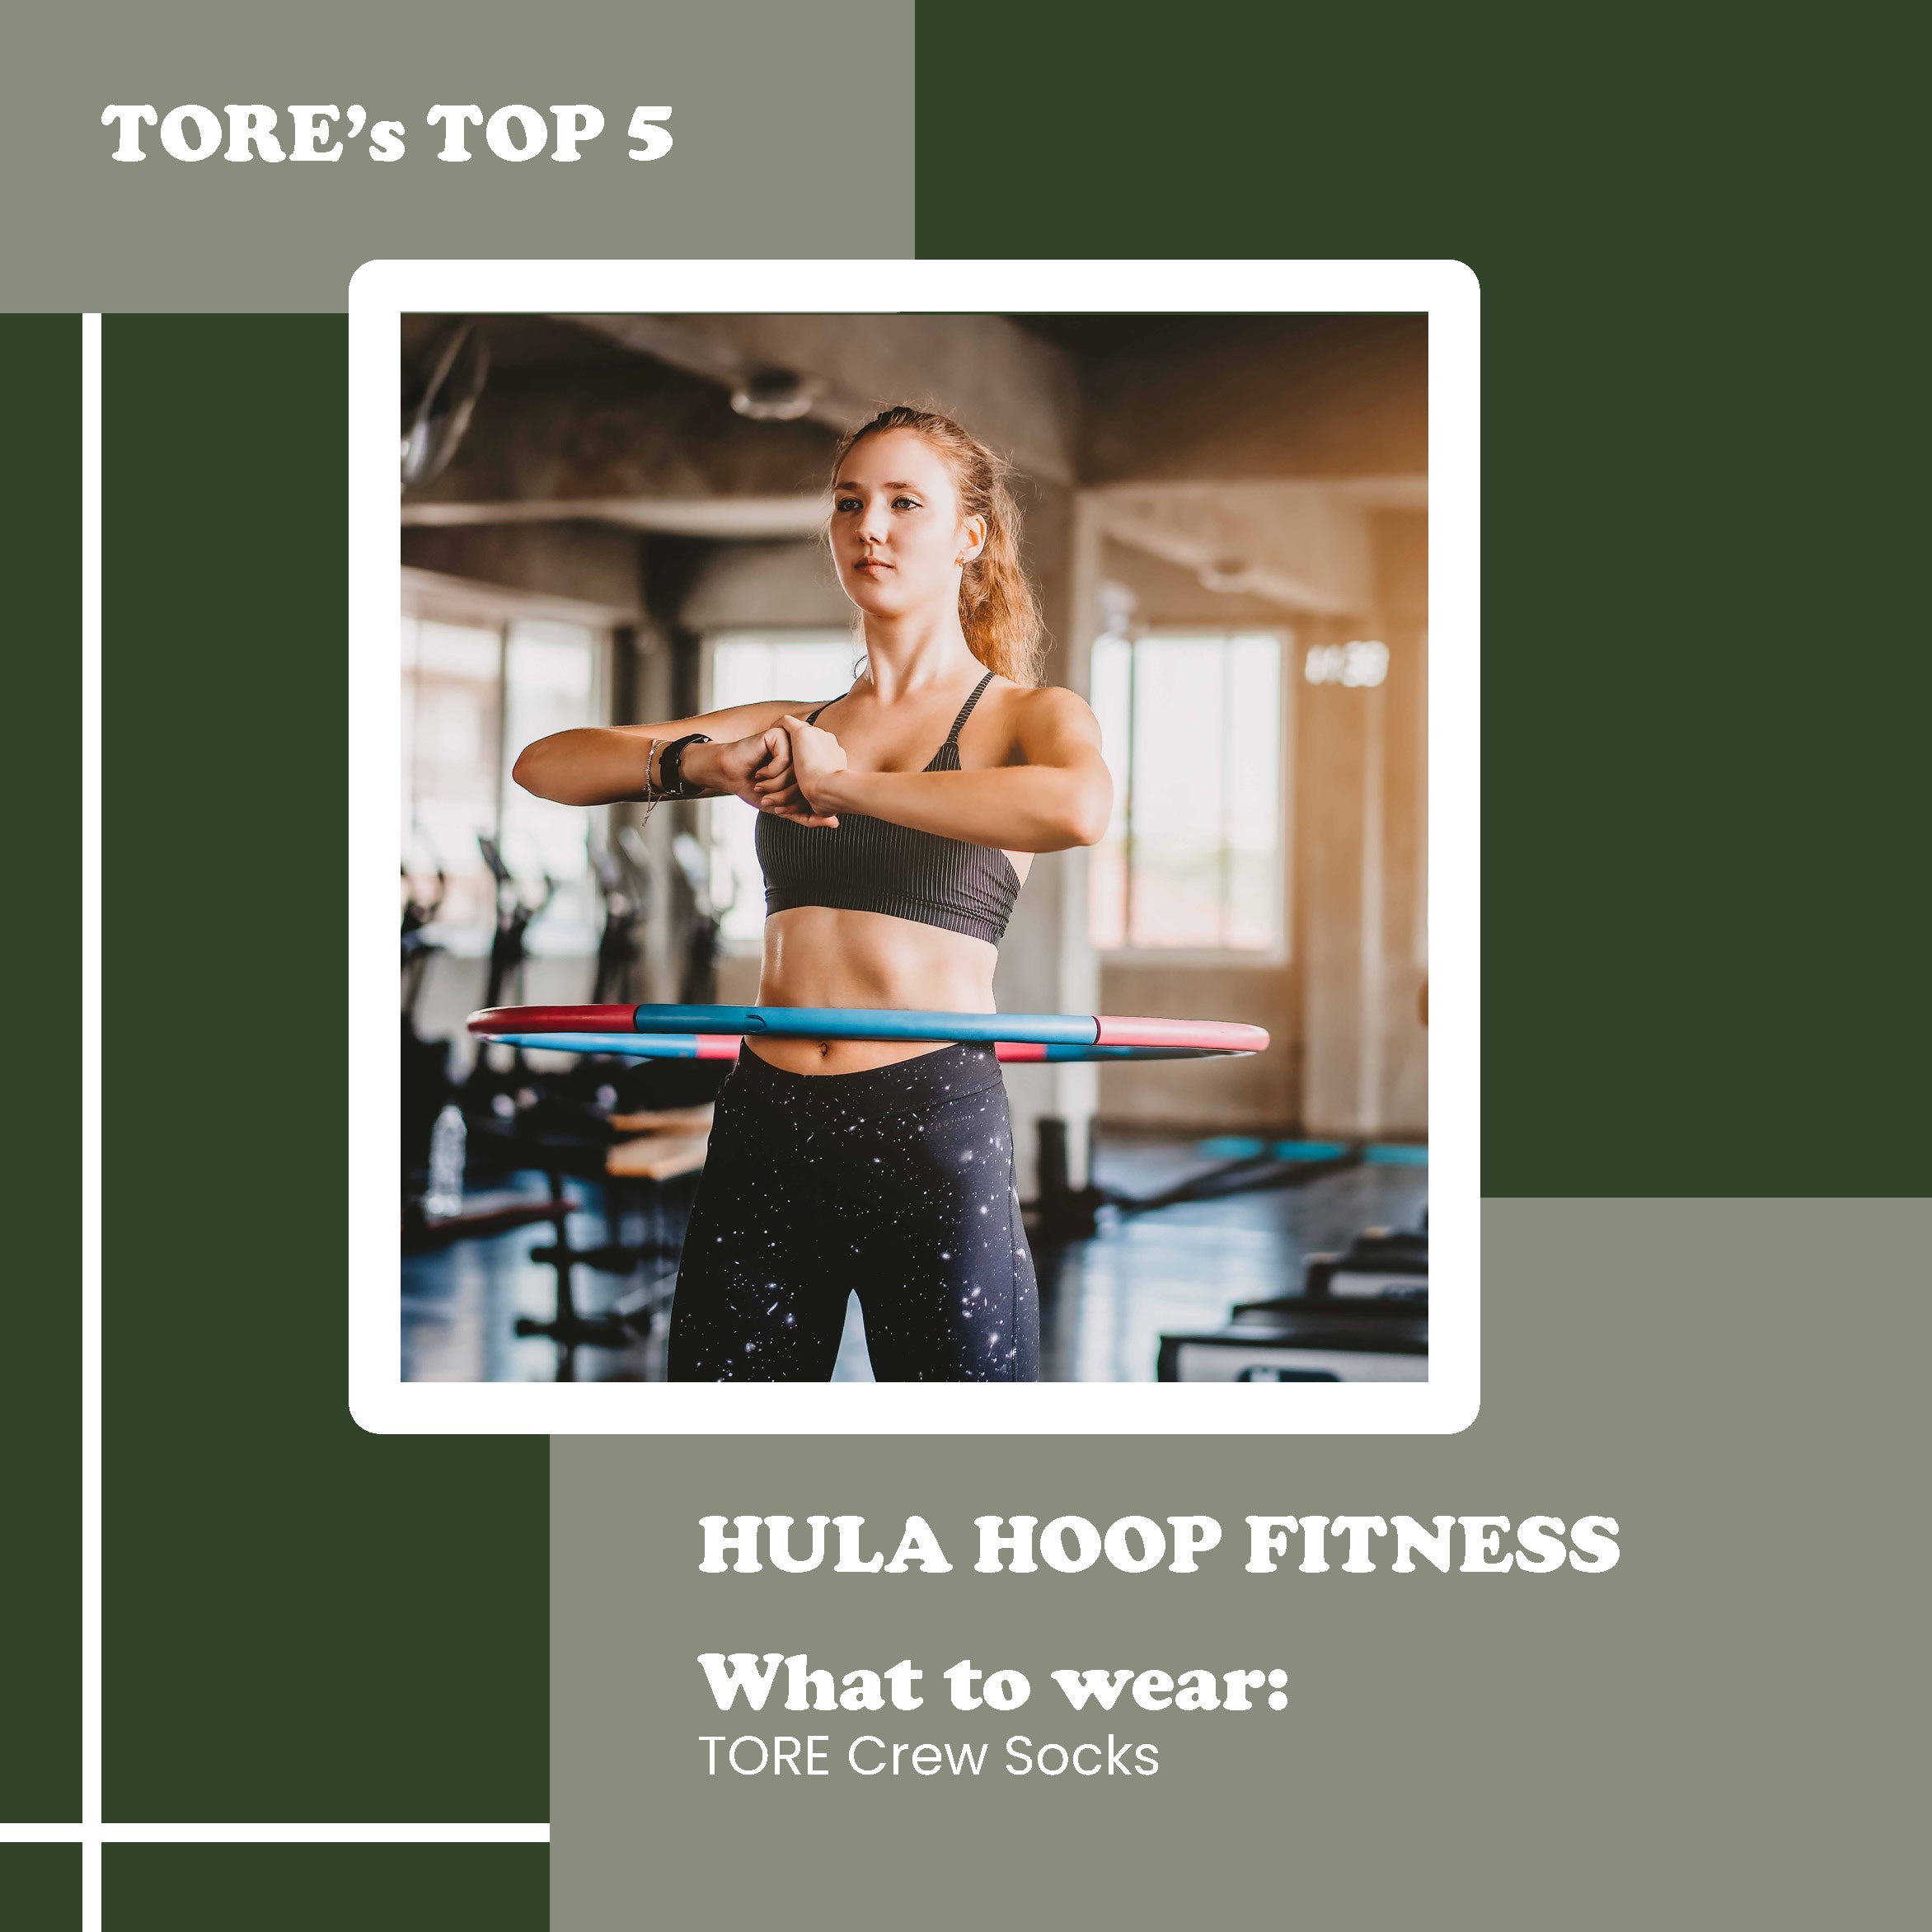 Tore's Top 5 Unconventional Fitness Classes